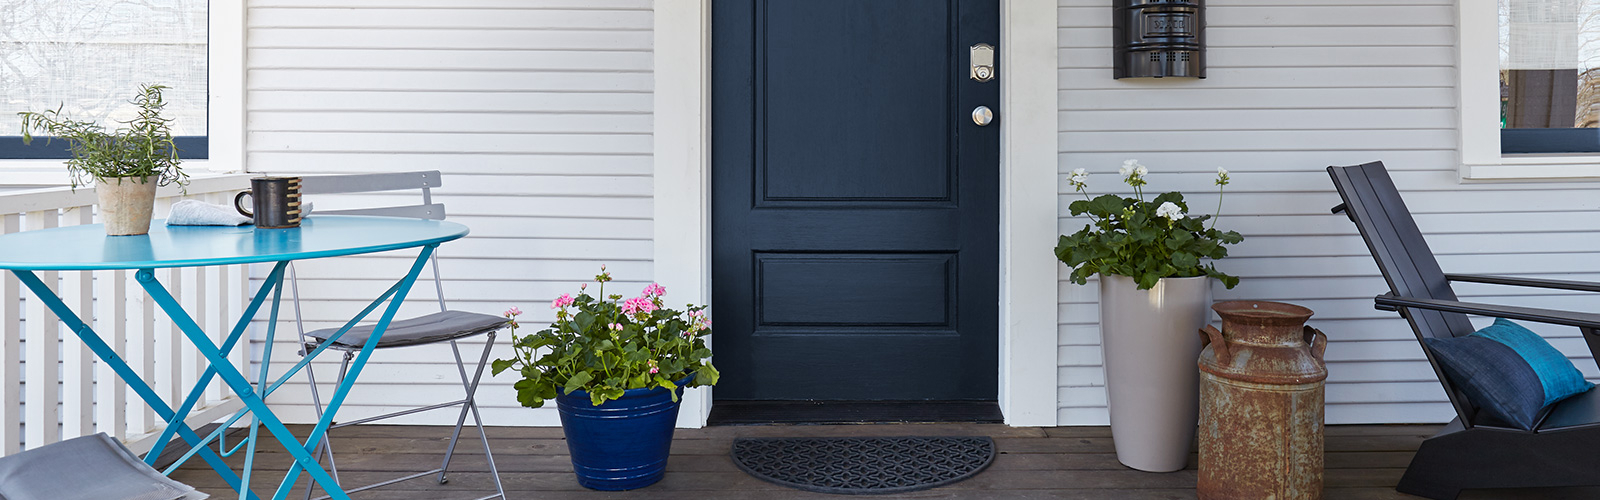 image of a porch with a blue door